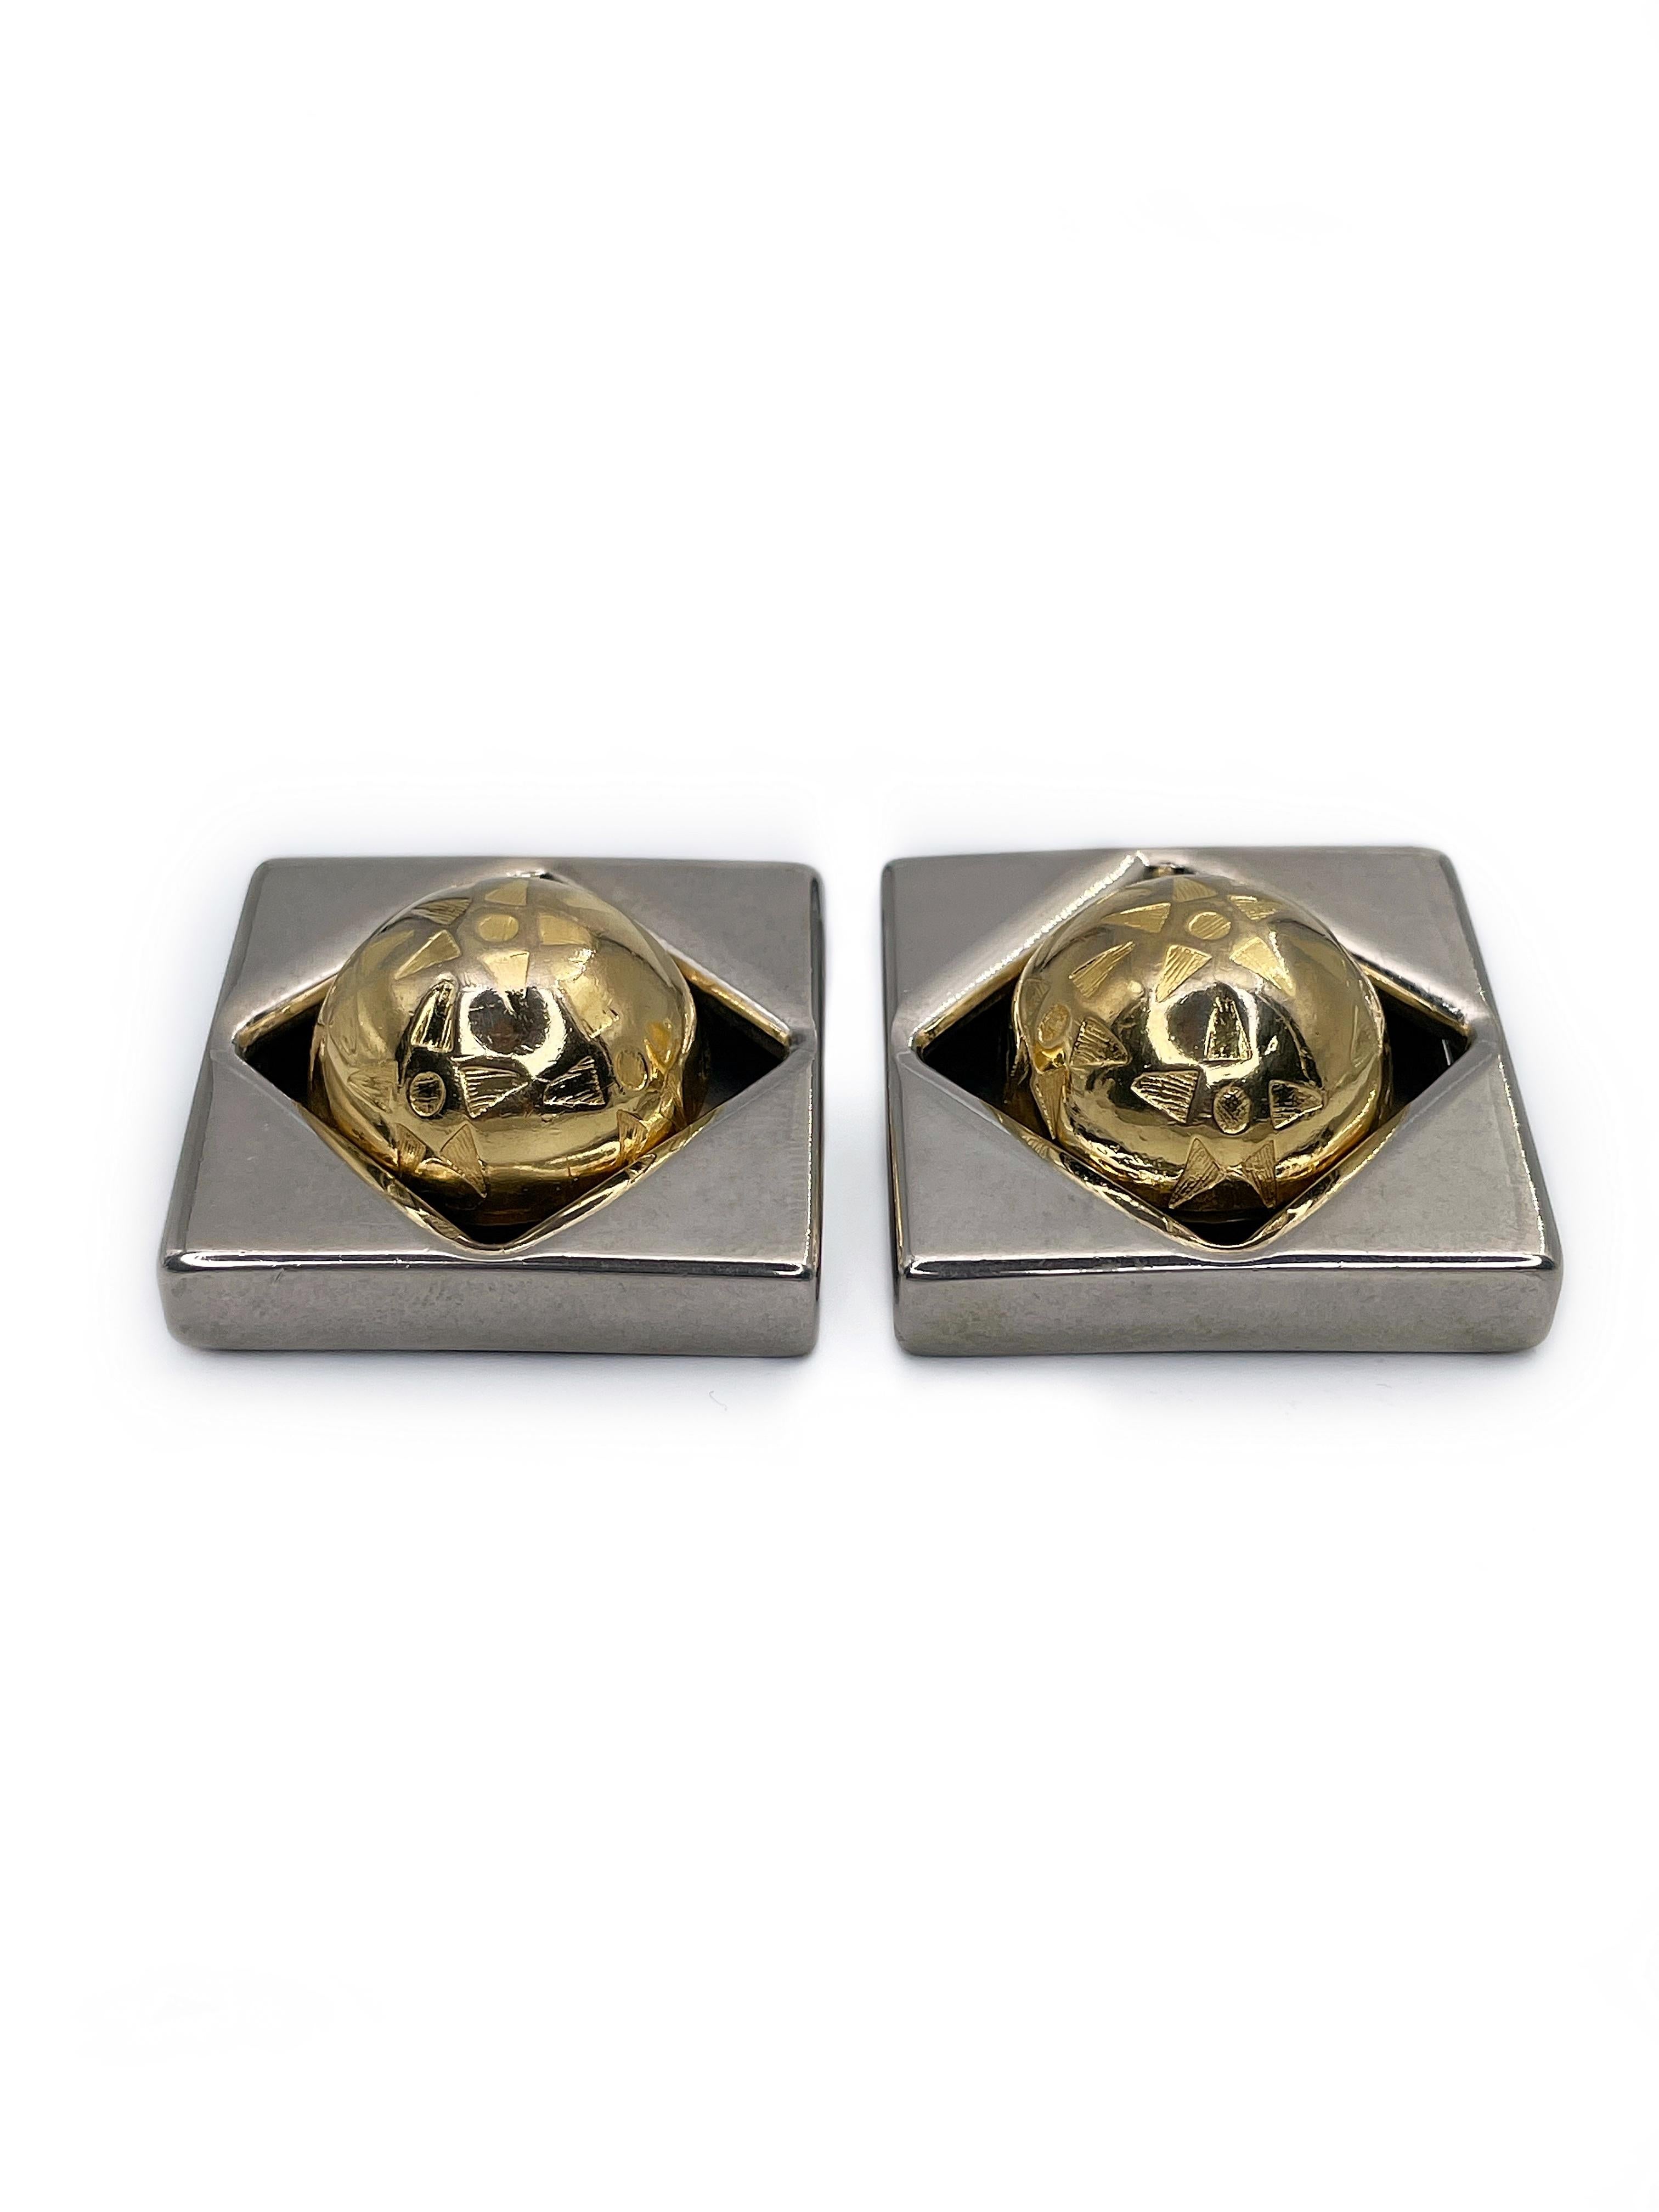 This is an iconic vintage square spheric globe clip on earrings designed by Celine in 1989. This piece is silver and gold plated. 

Markings: “CELINE 89. Made in Italy” (shown in photos).

Size: 3x3cm

———

If you have any questions, please feel